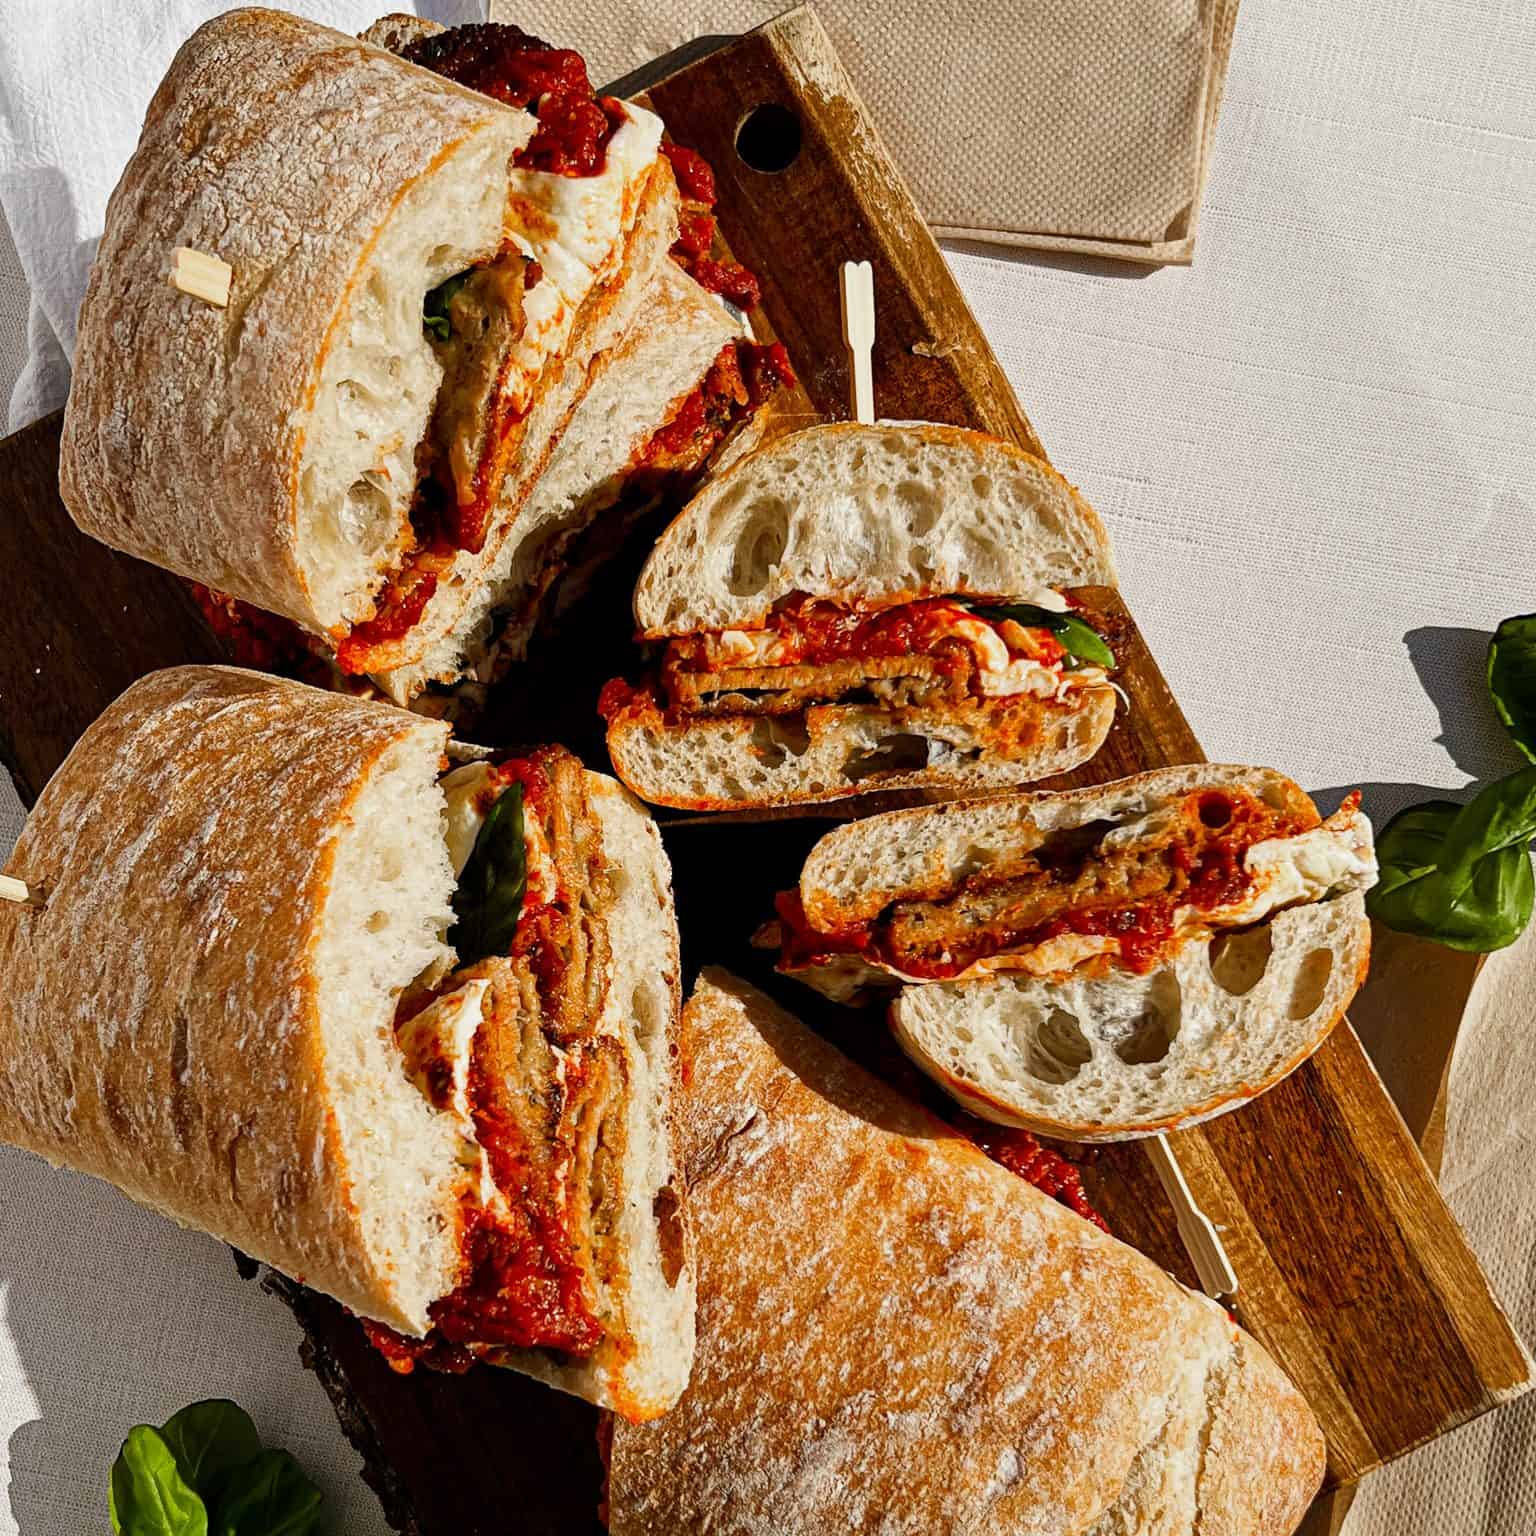 Veal Parmesan Sandwich sliced. featured image